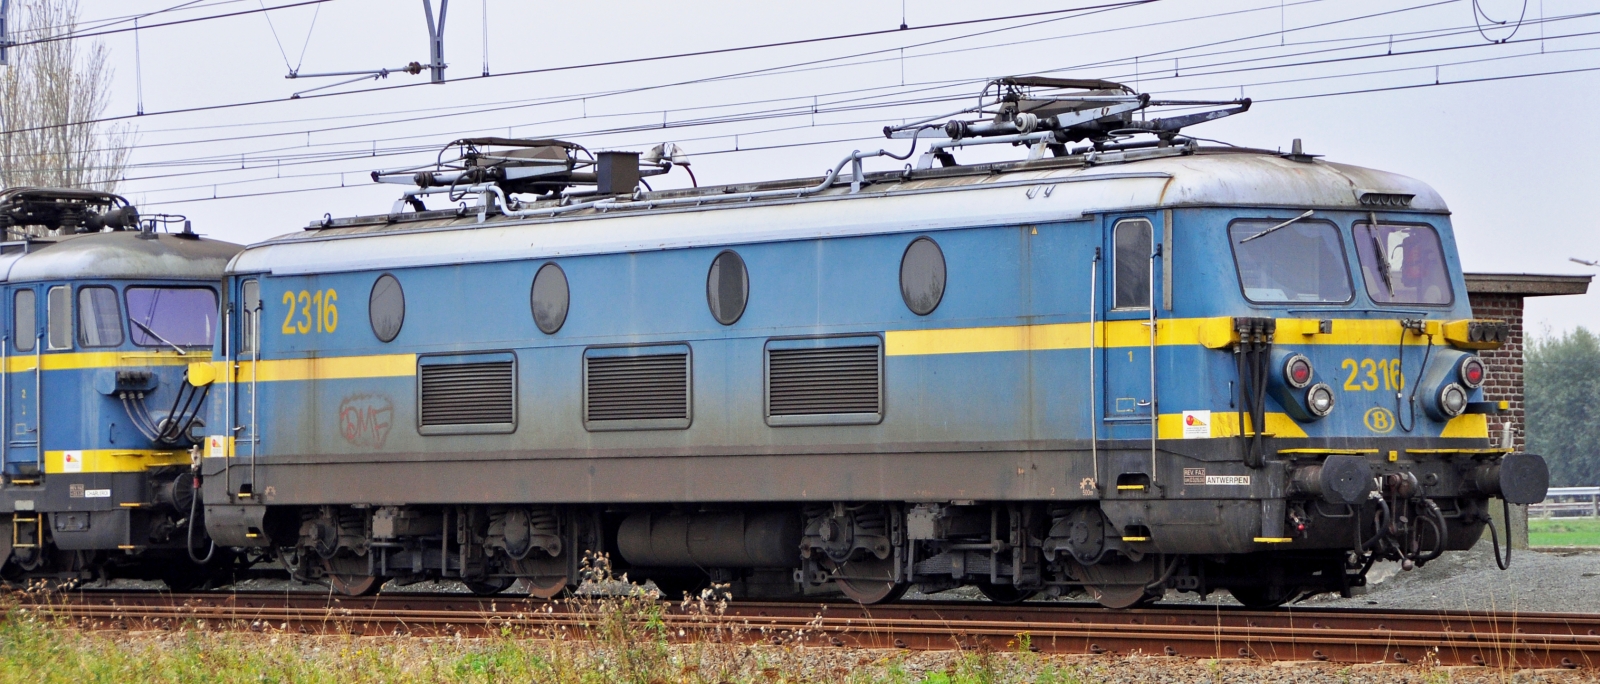 2316 in 2011 together with a second class 23 locomotive, you can see the cables for the multiple control